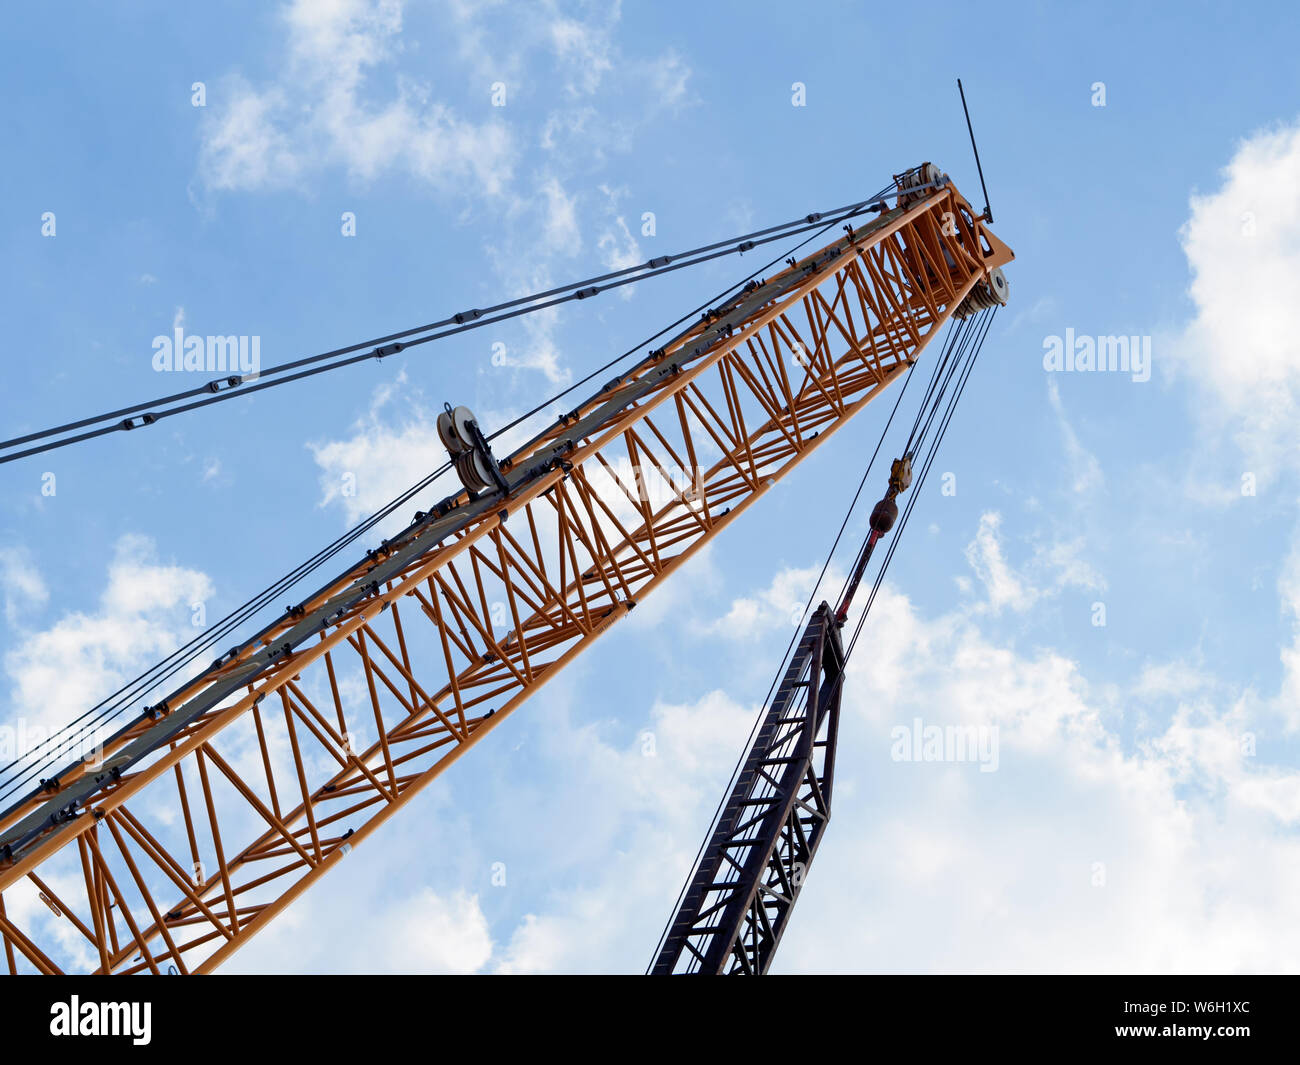 Liebherr LR 1250 250 ton Crawler Crane boom against blue sky with clouds. This crane being used in the New Corpus Christi Harbor Bridge project 2019. Stock Photo